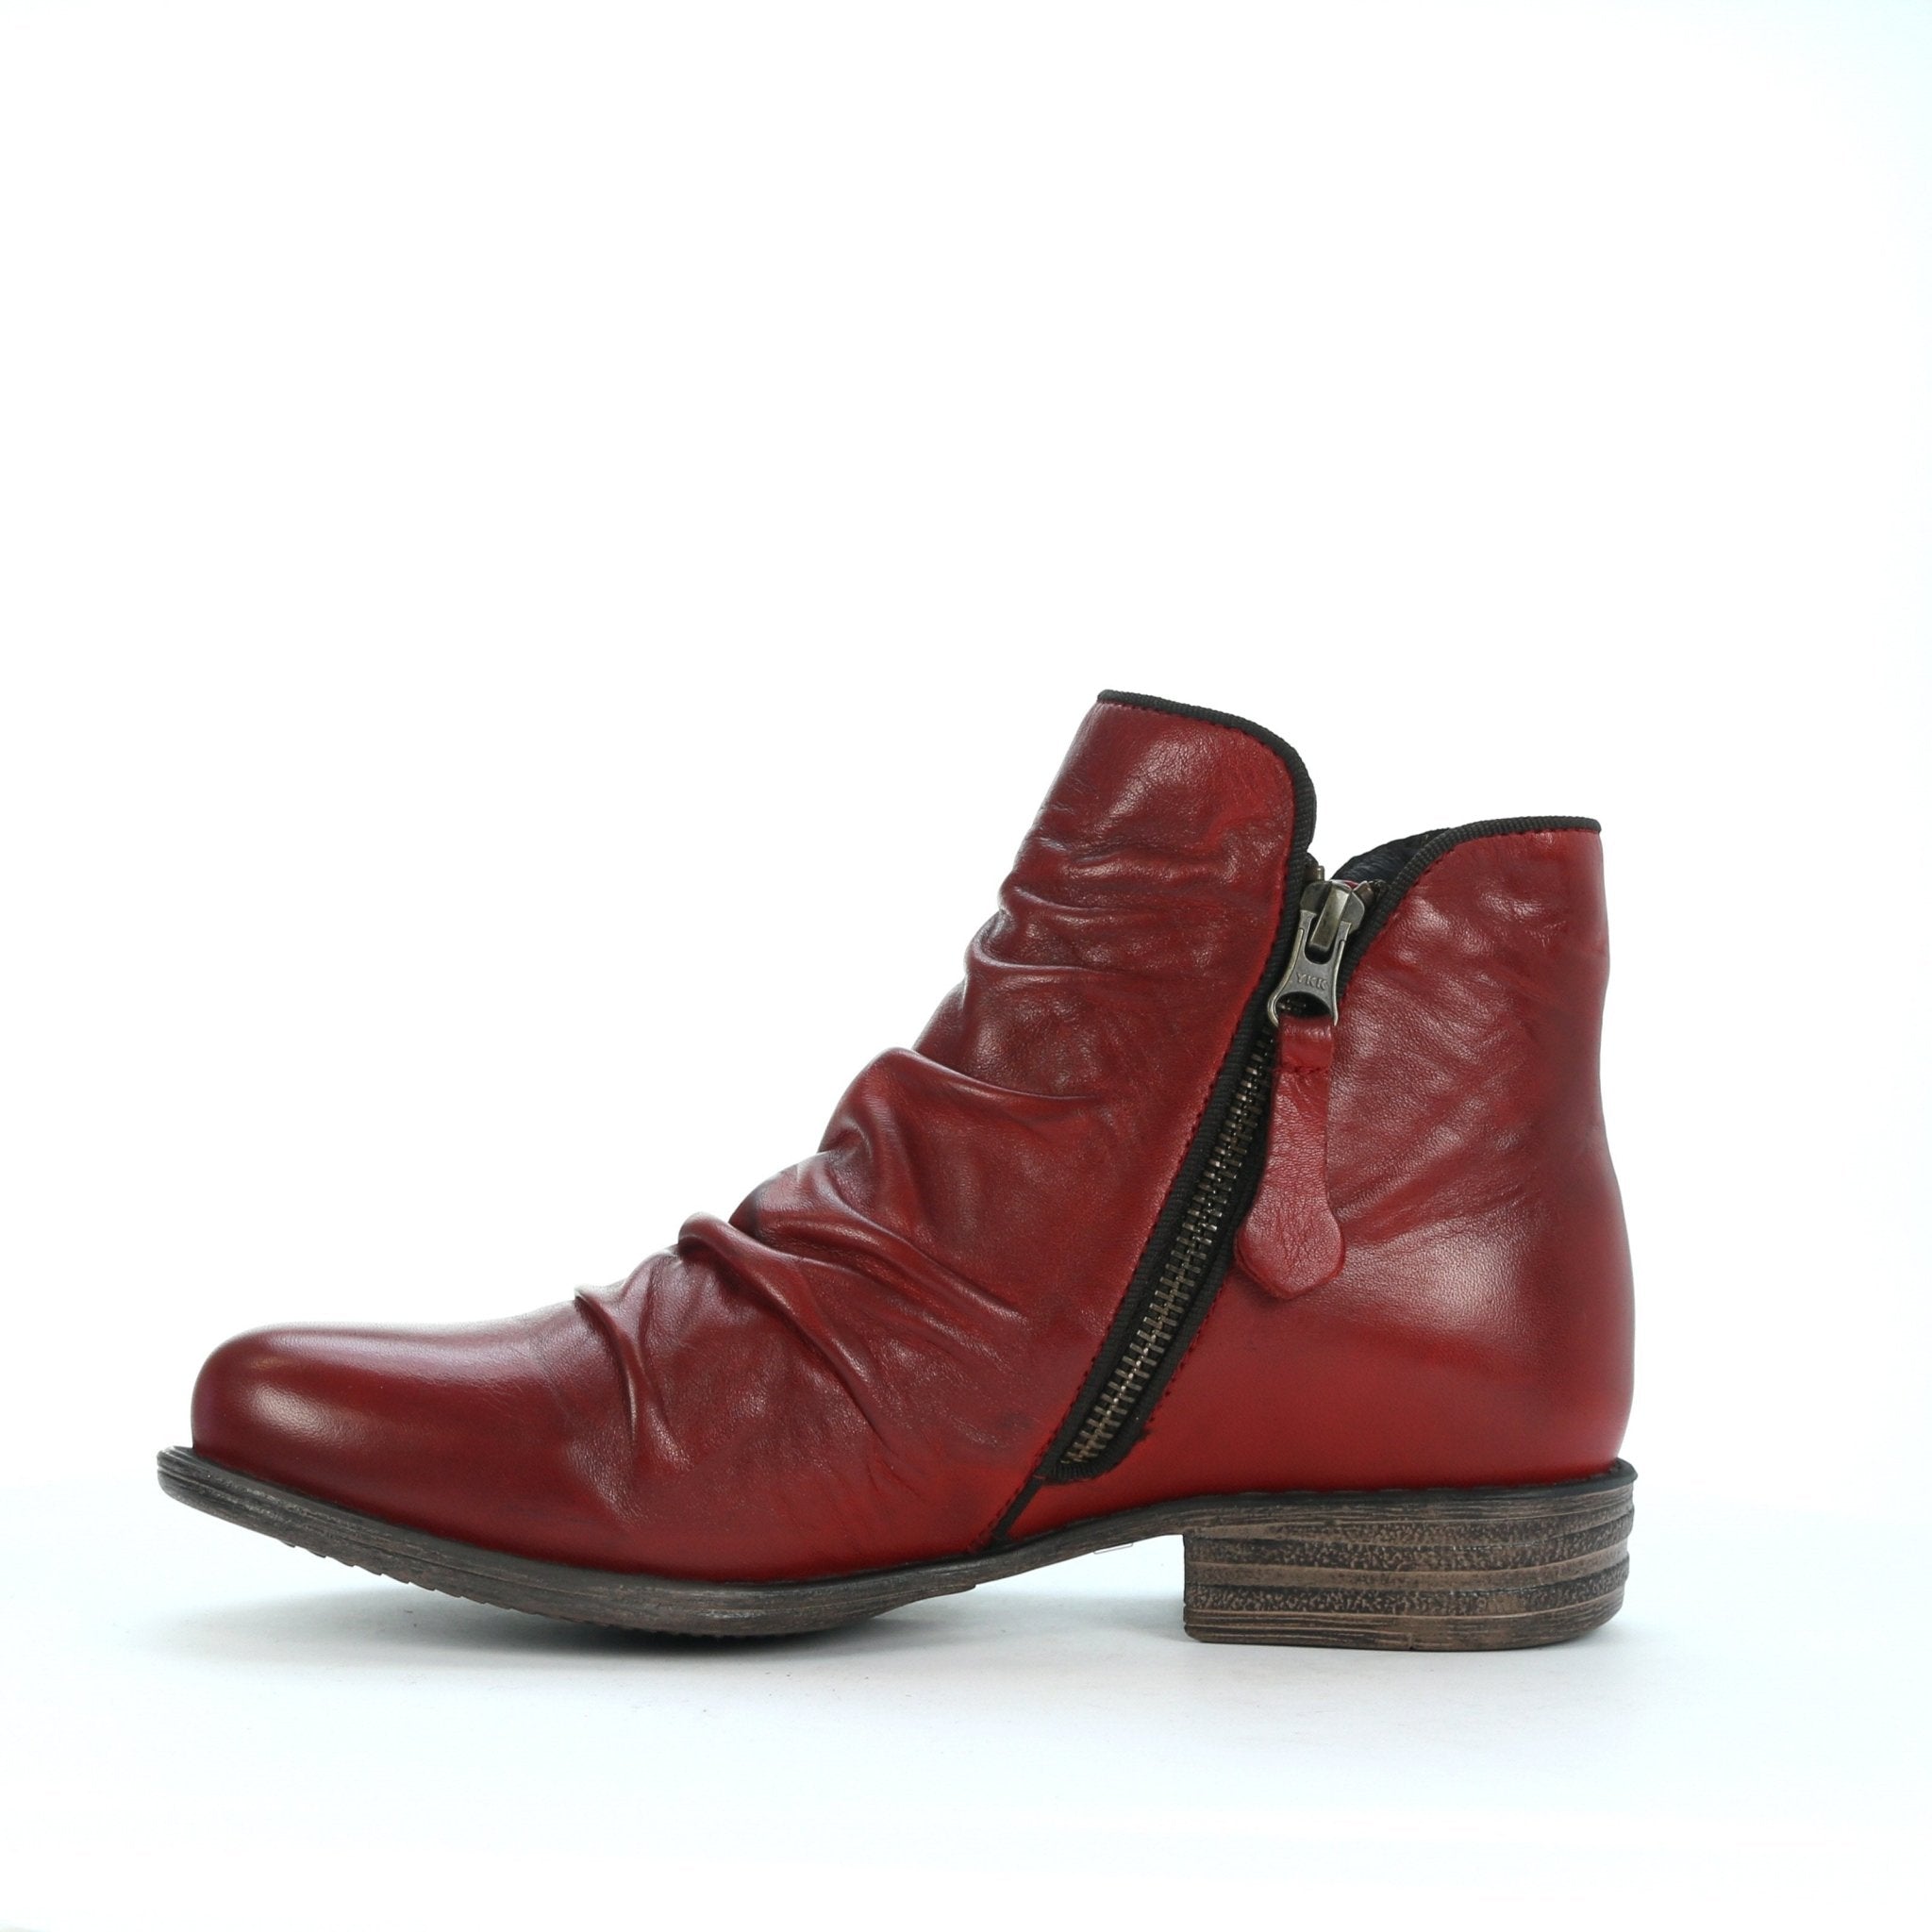 WILLET - EOS Footwear - Ankle Boots #color_Brandy